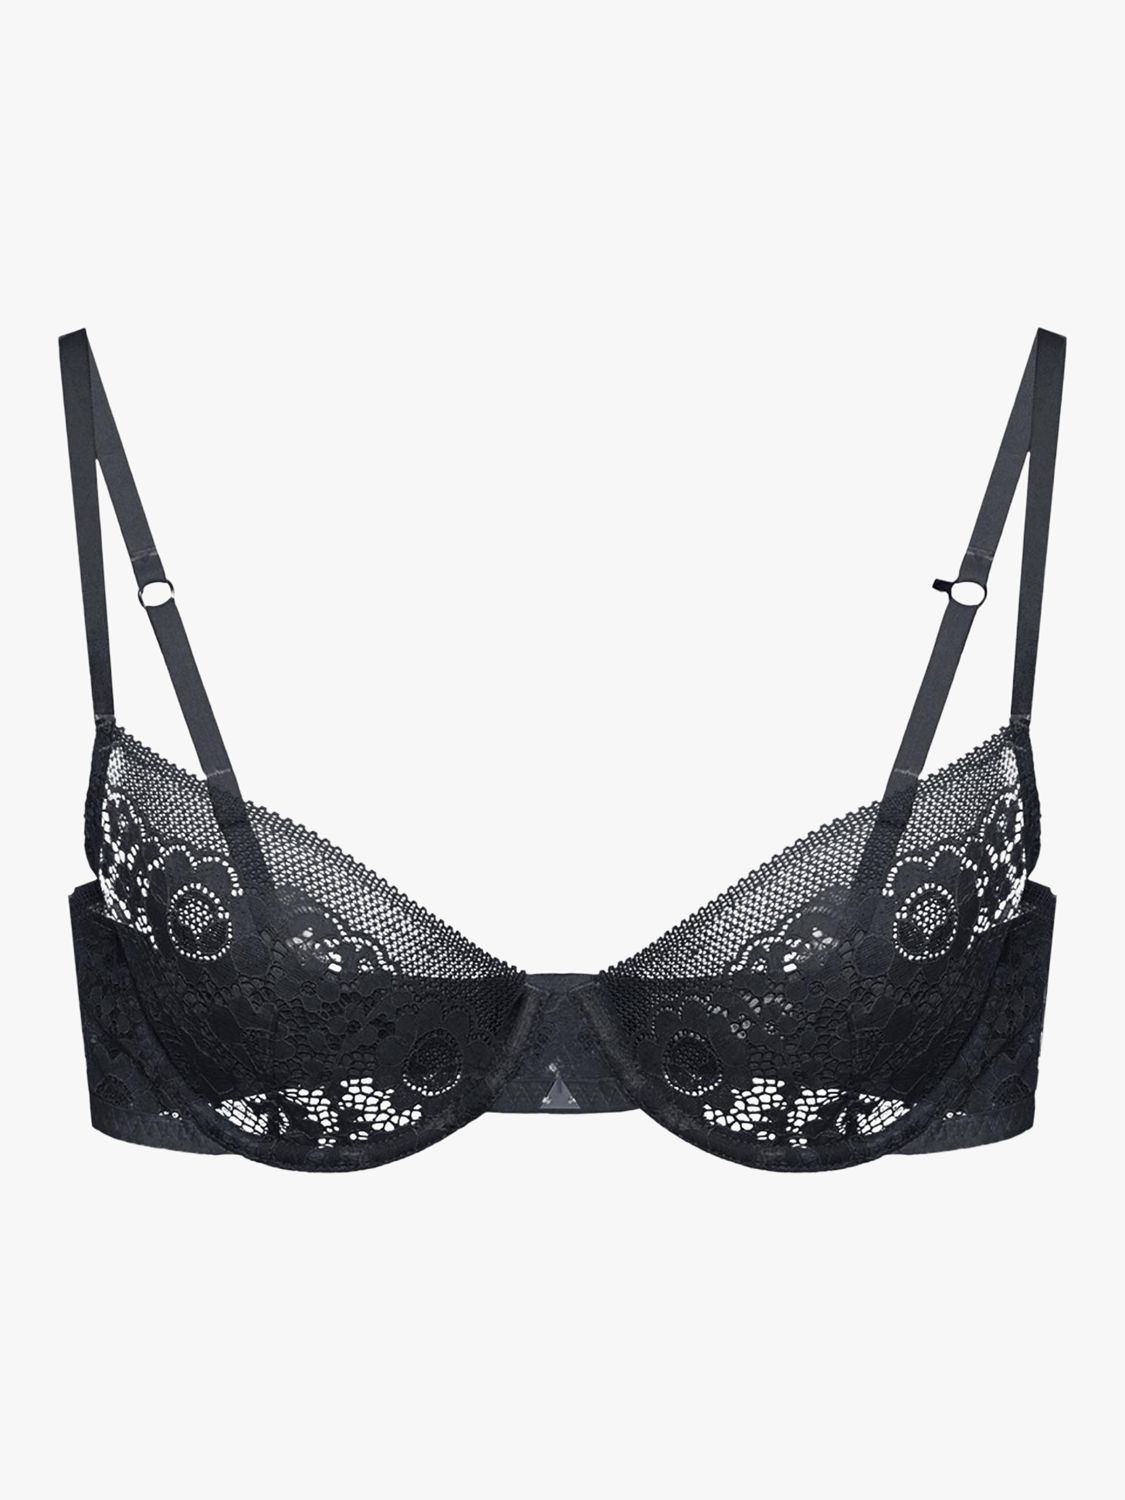 Beija London Forecast Y Non Padded Underwired Bra, B-D Cup Sizes